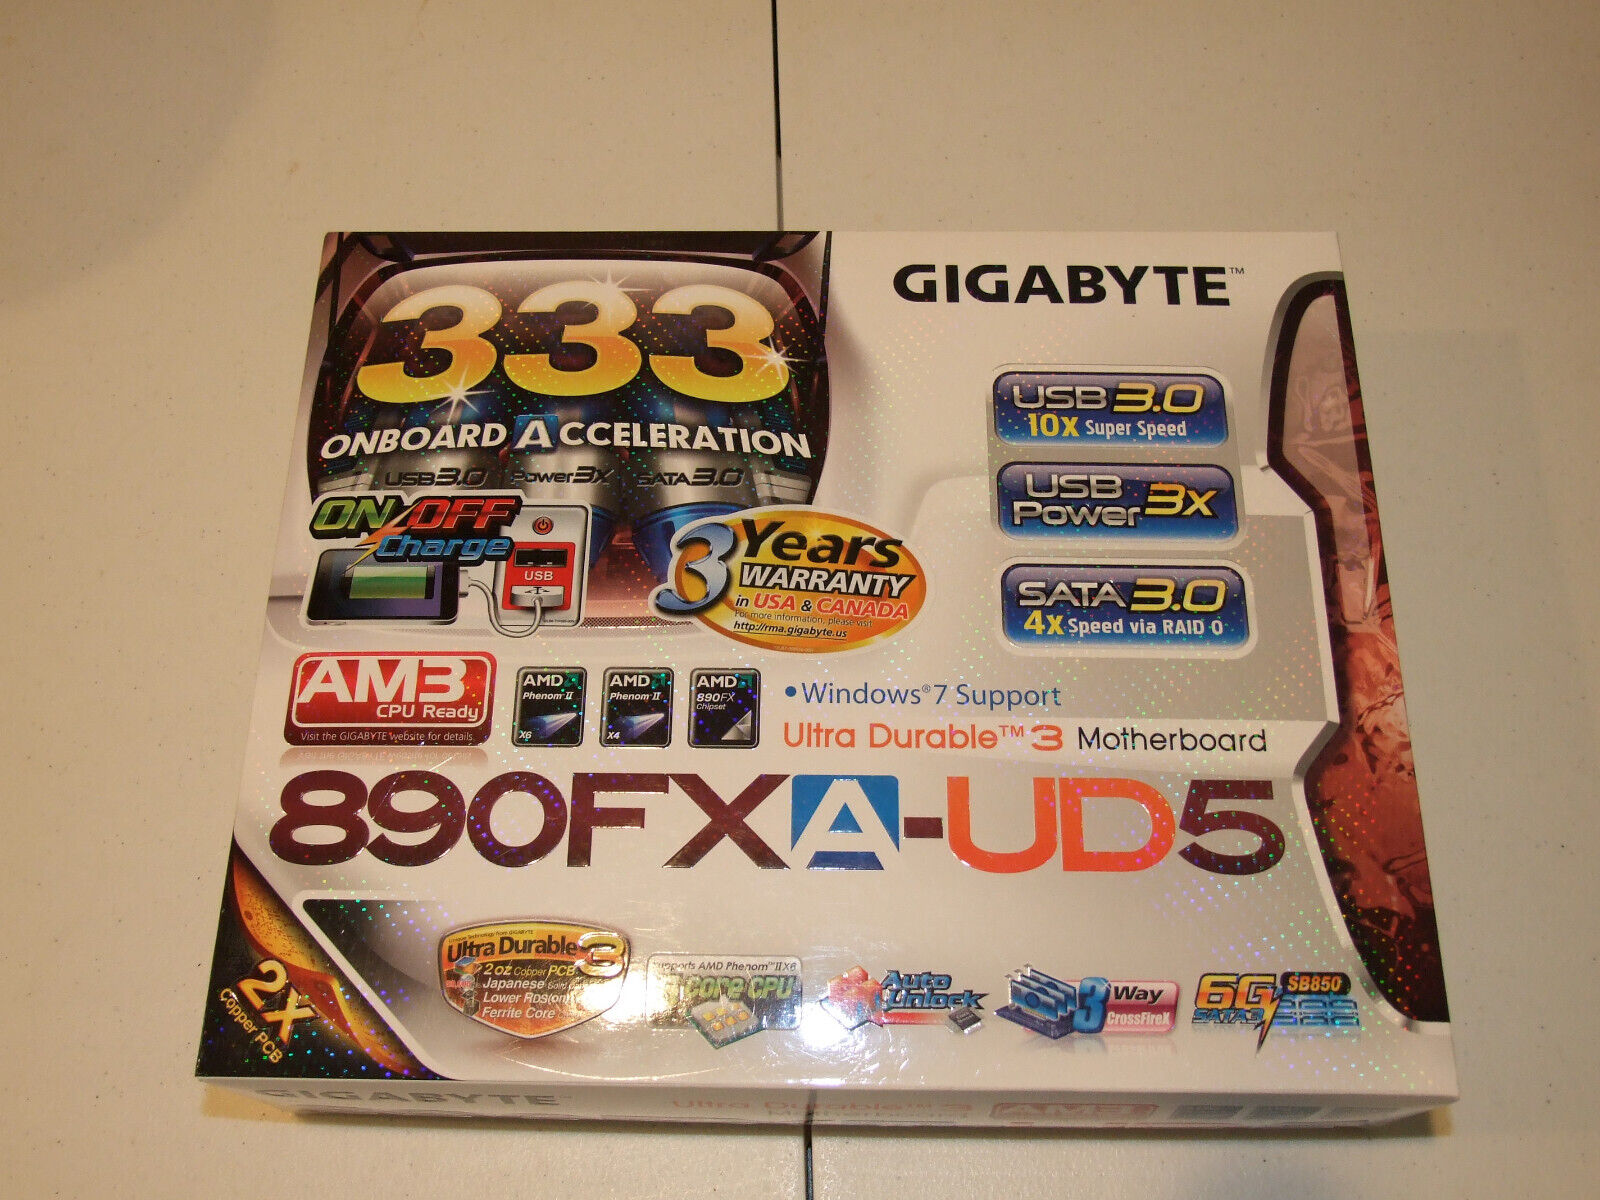 GIGABYTE GA-890FXA-UD5 AMD Motherboard in Perfect Working and Cosmetic Condition